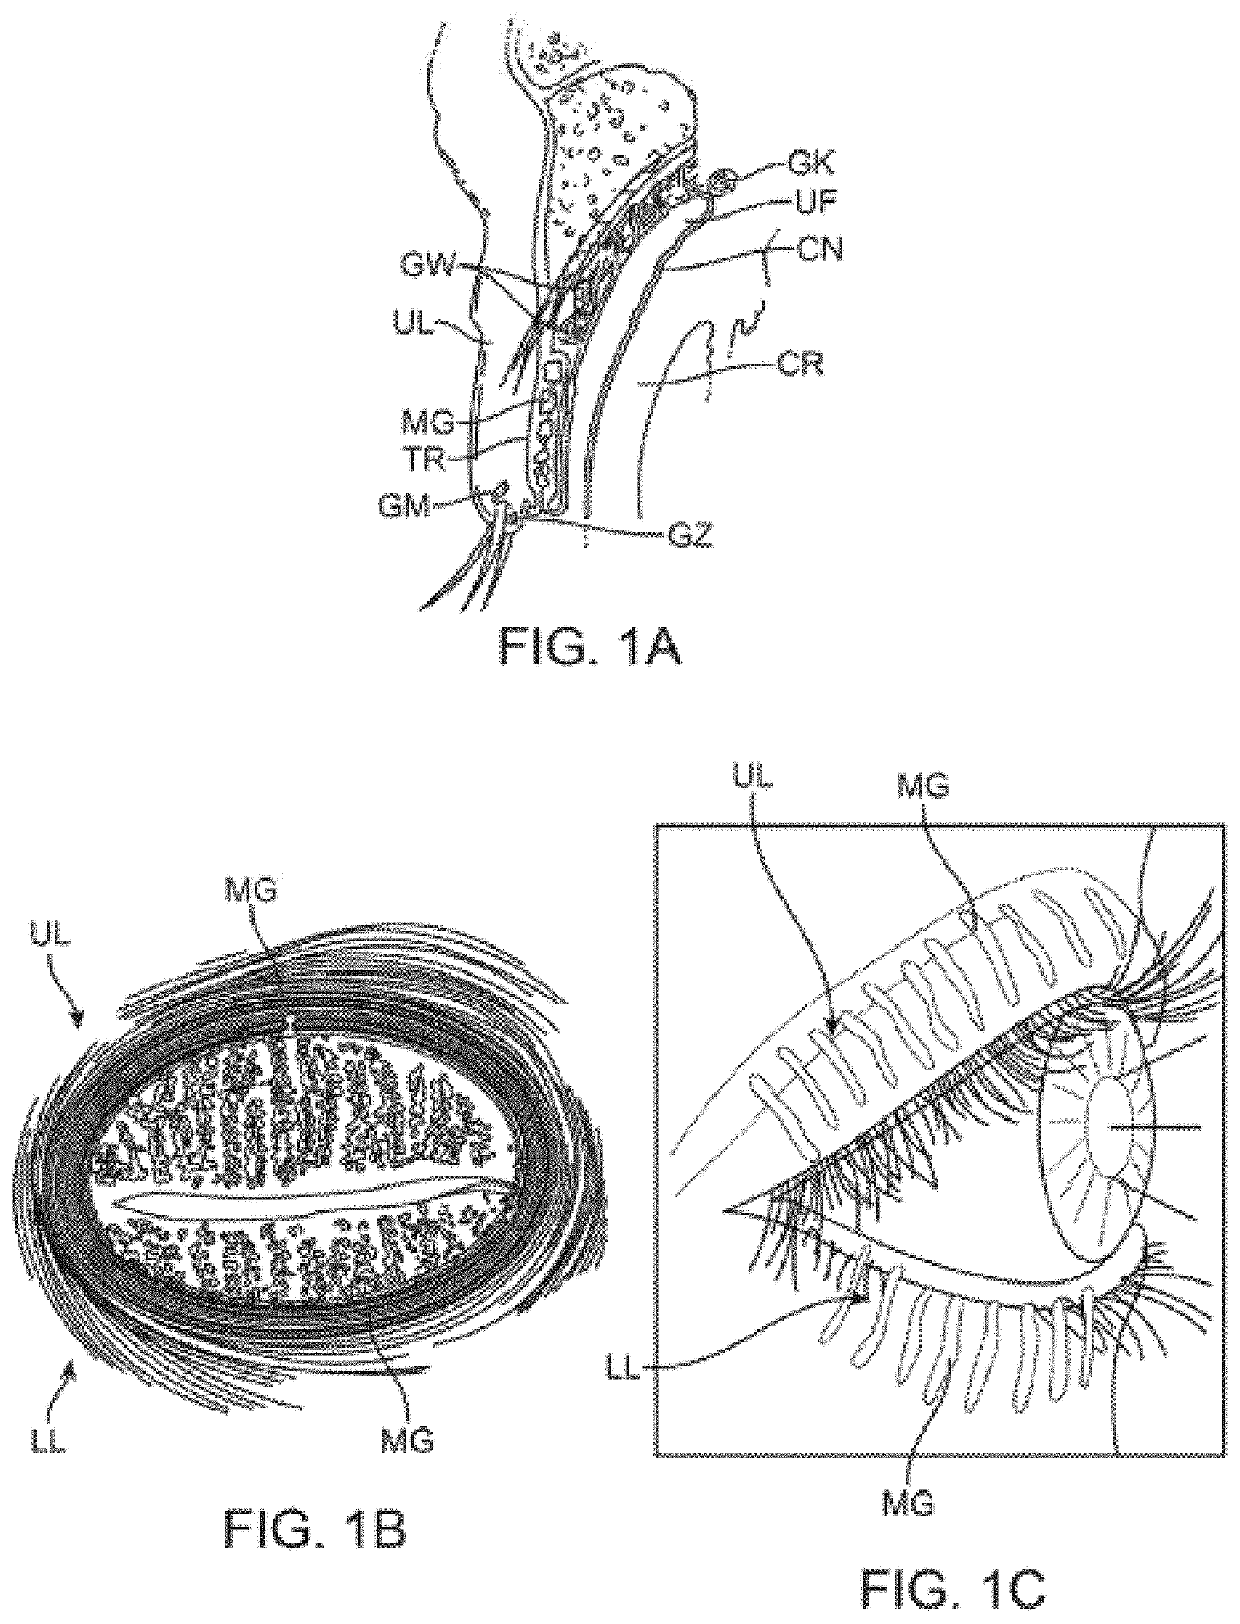 Treatment apparatus and methods